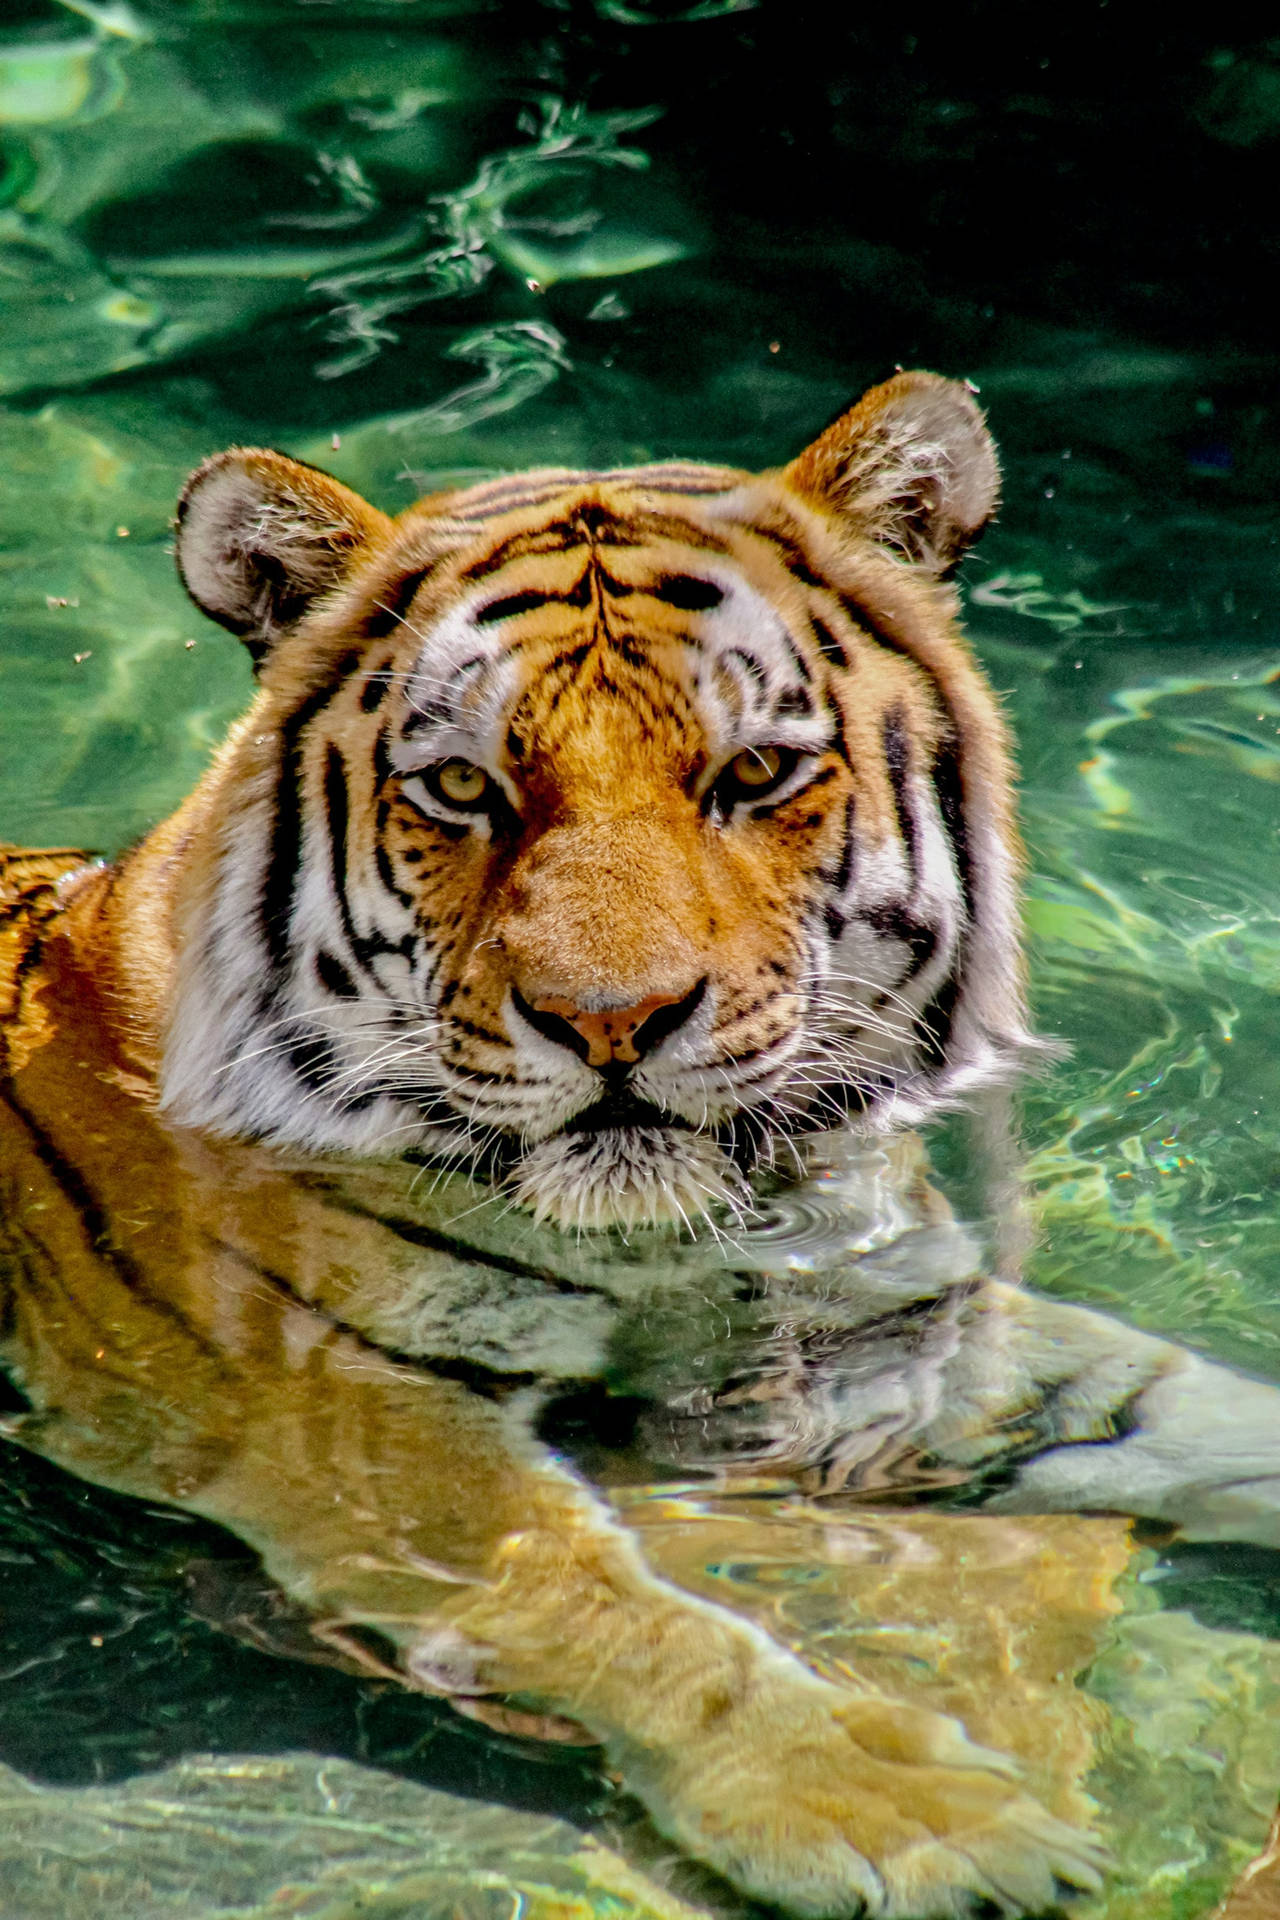 Submerged In Water Tiger Iphone Wallpaper